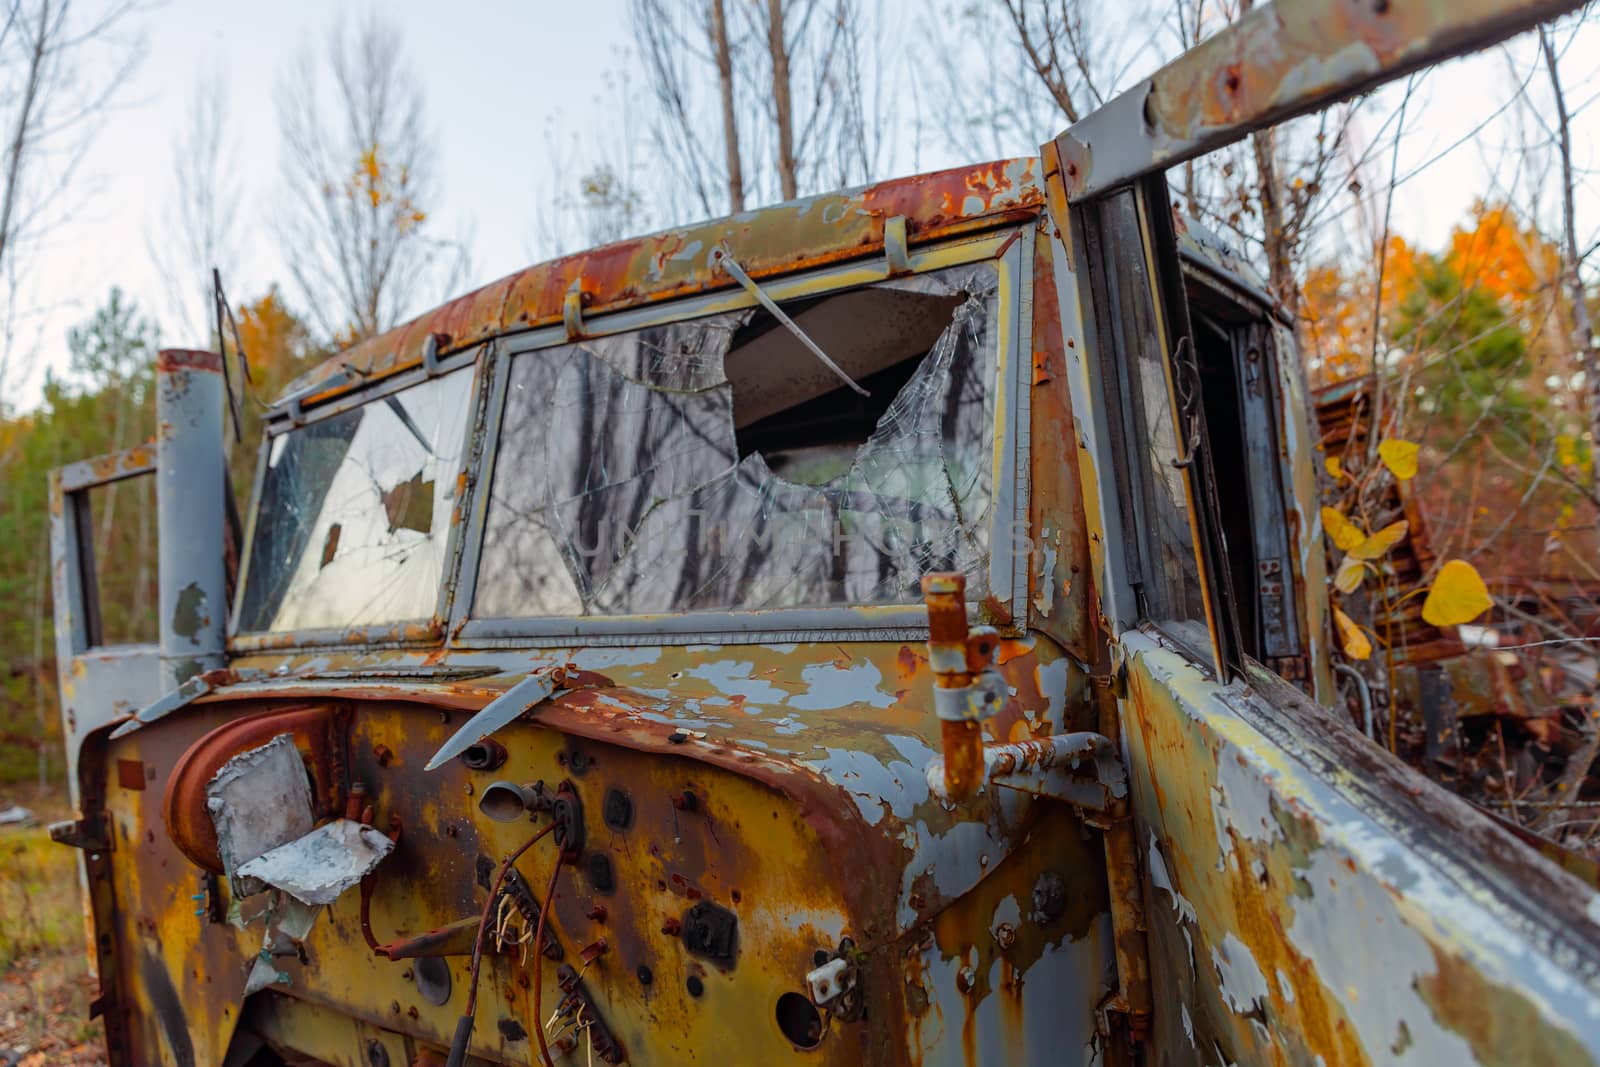 Abandoned truck left outside at Chernobyl Fire station closeup